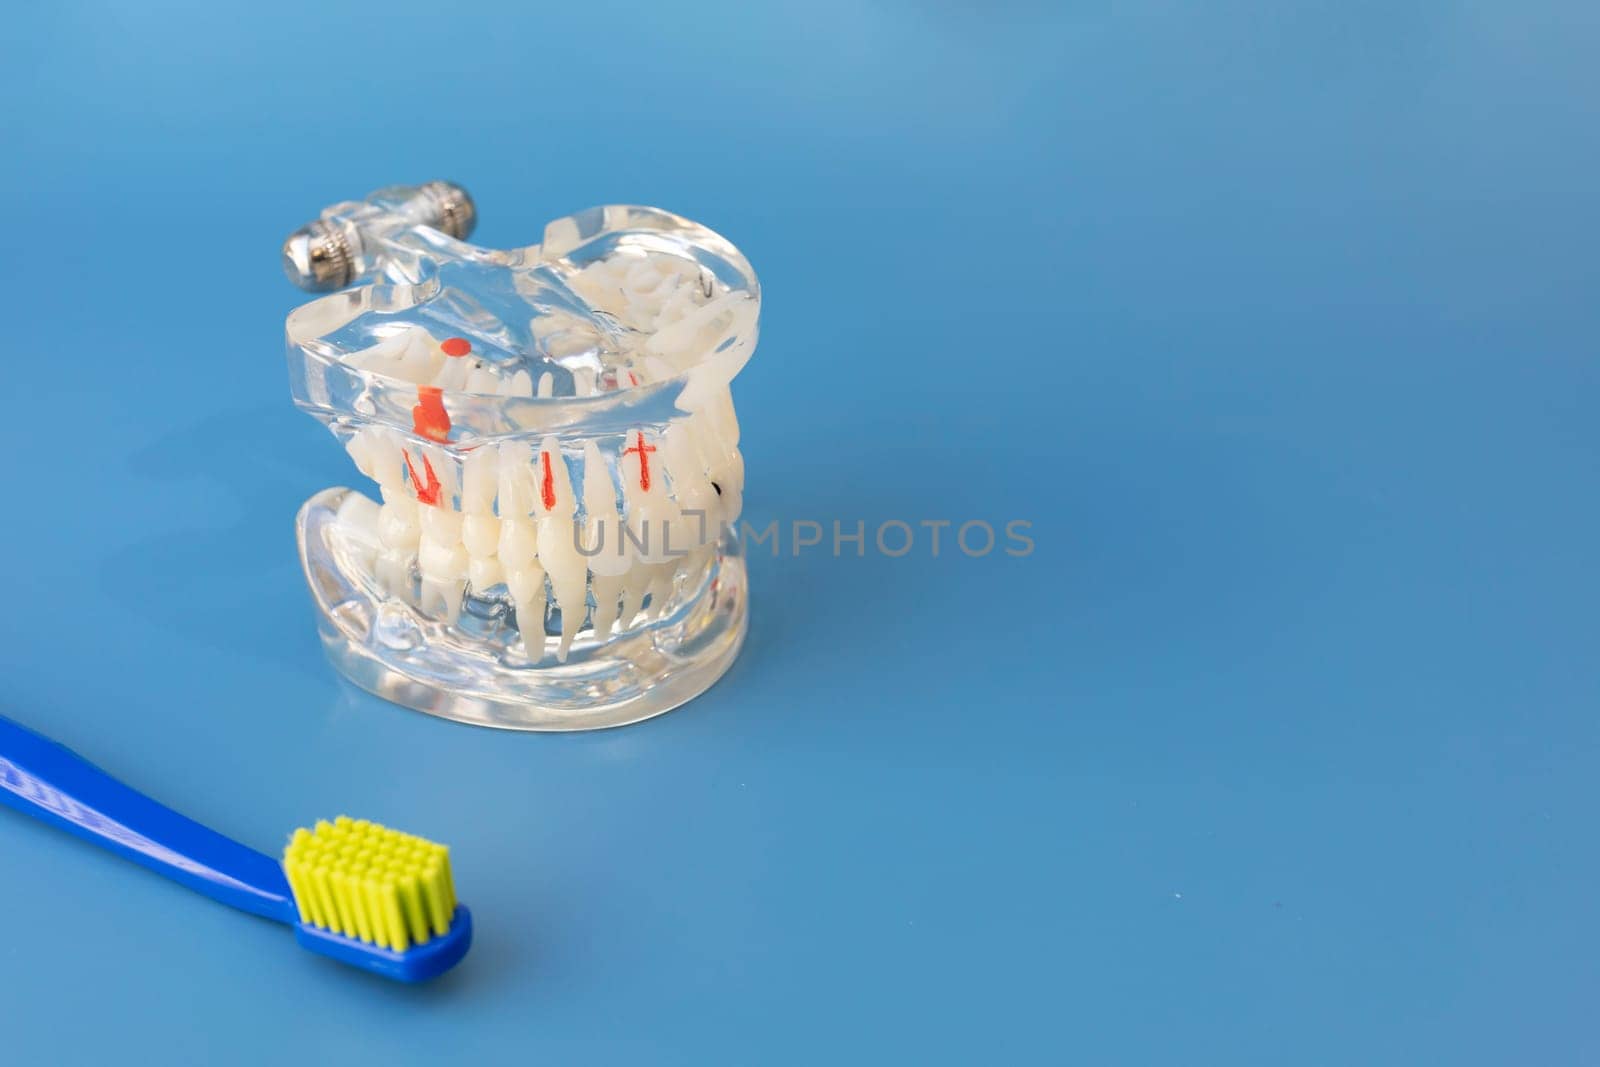 Transparent Pathological Tooth Model. Dental Education Implant Equipment And Toothbrush on Blue Background. Copy Space For text. Horizontal Mockup. Dentistry and Oral Health. High quality photo